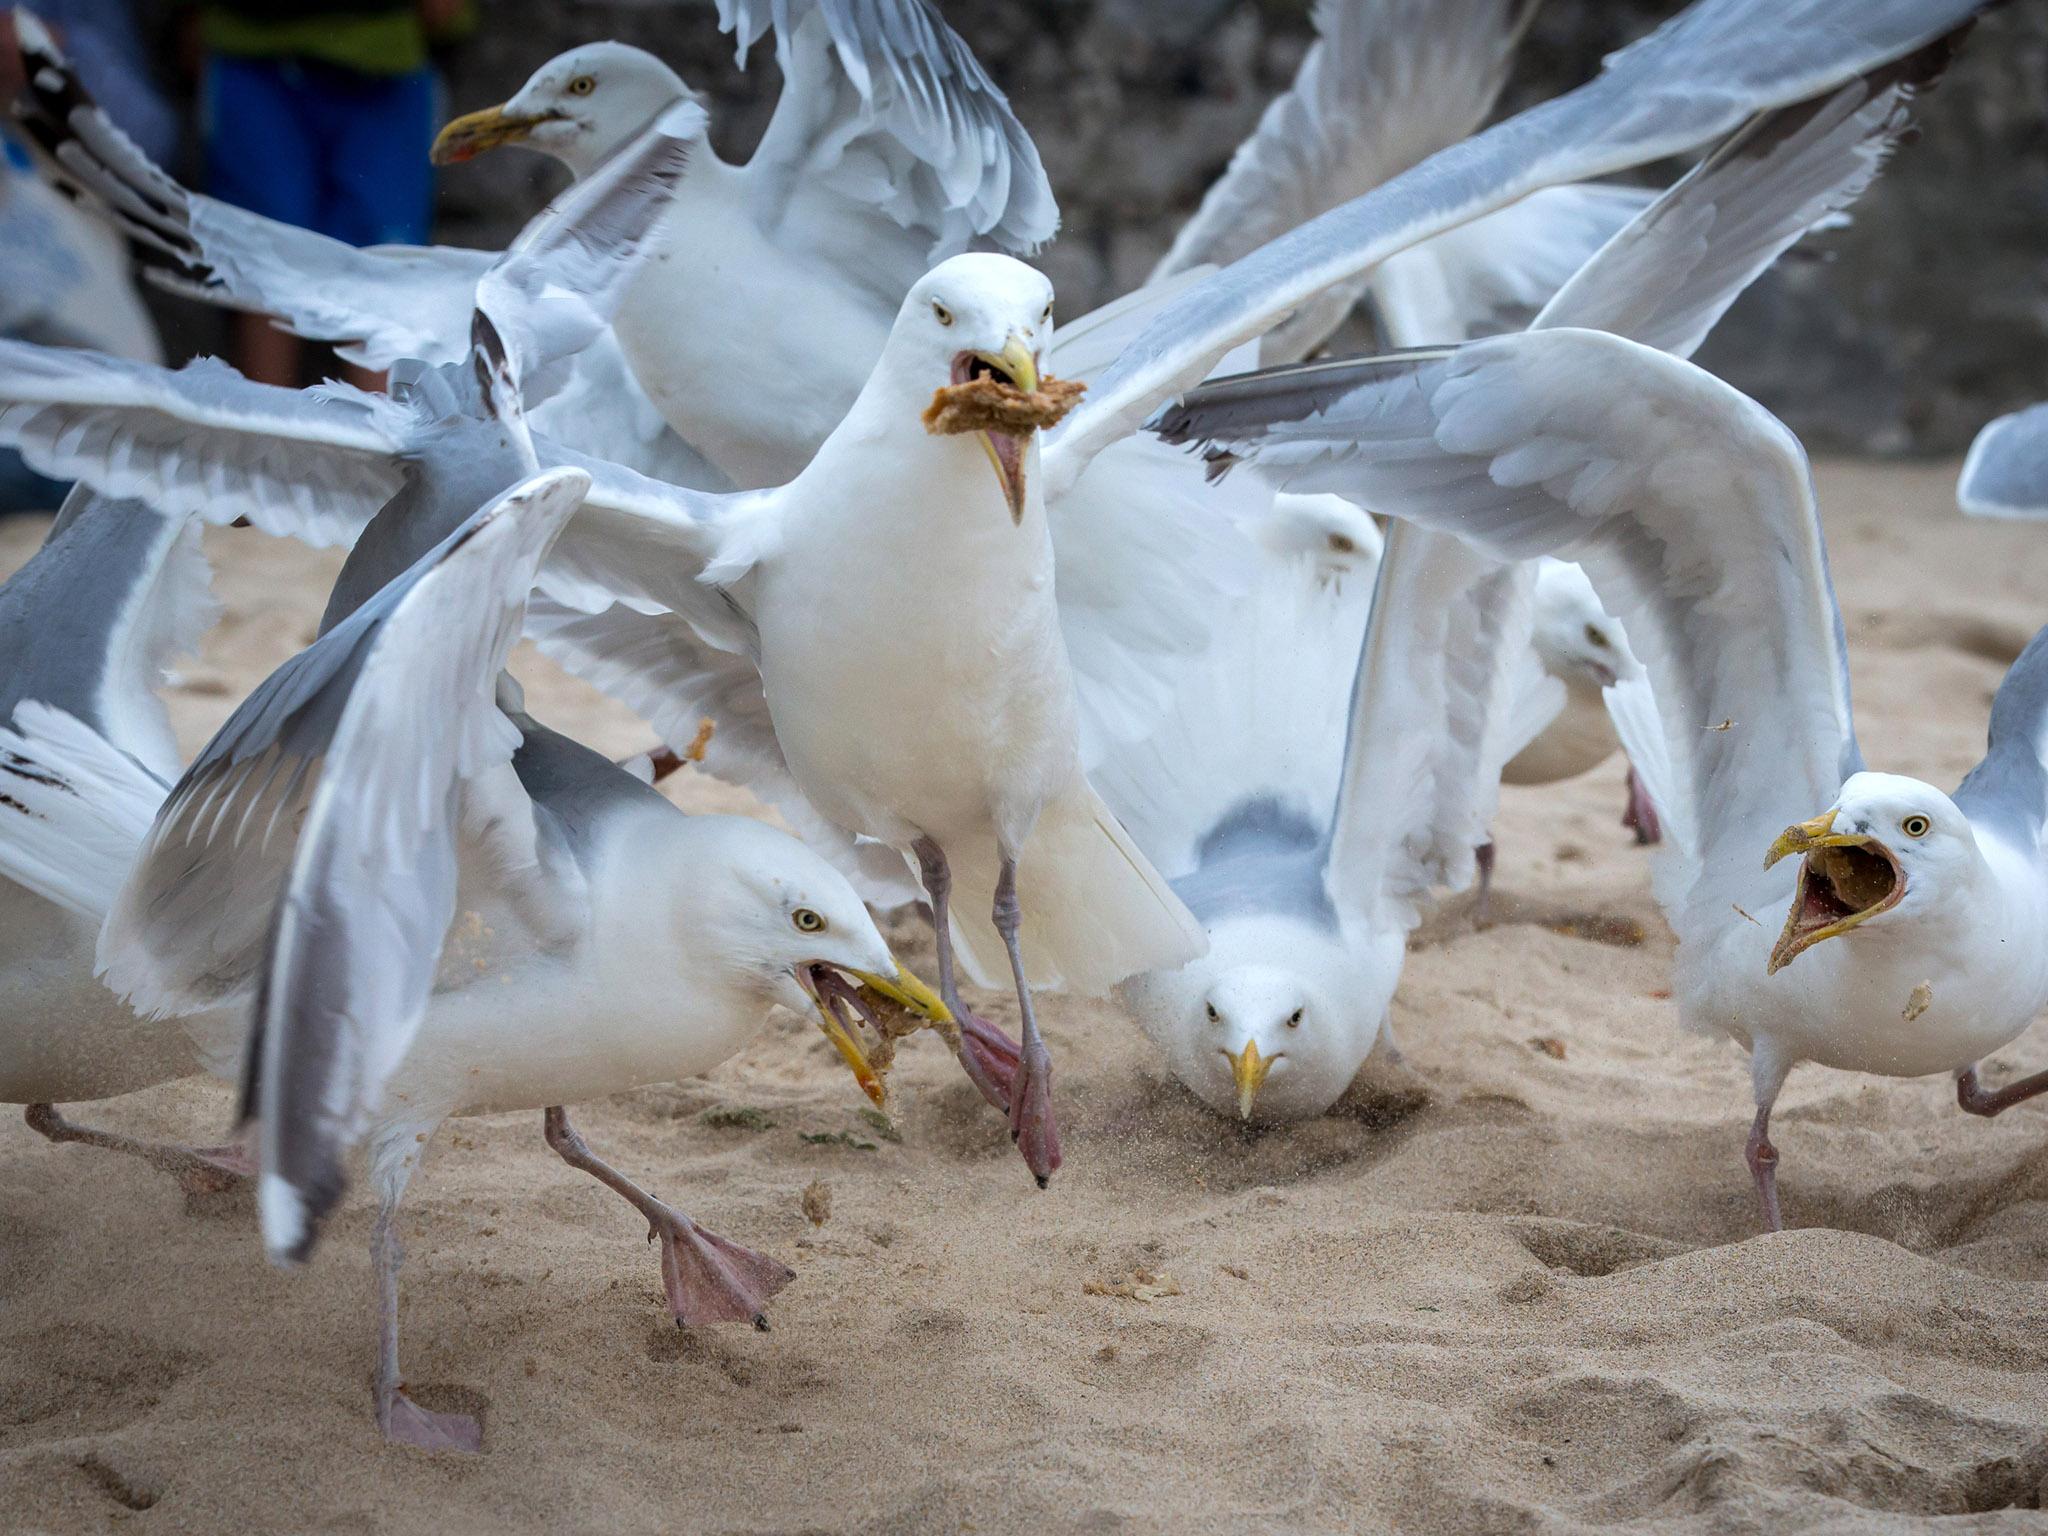 'Aggressive' seagulls are targeted by the order